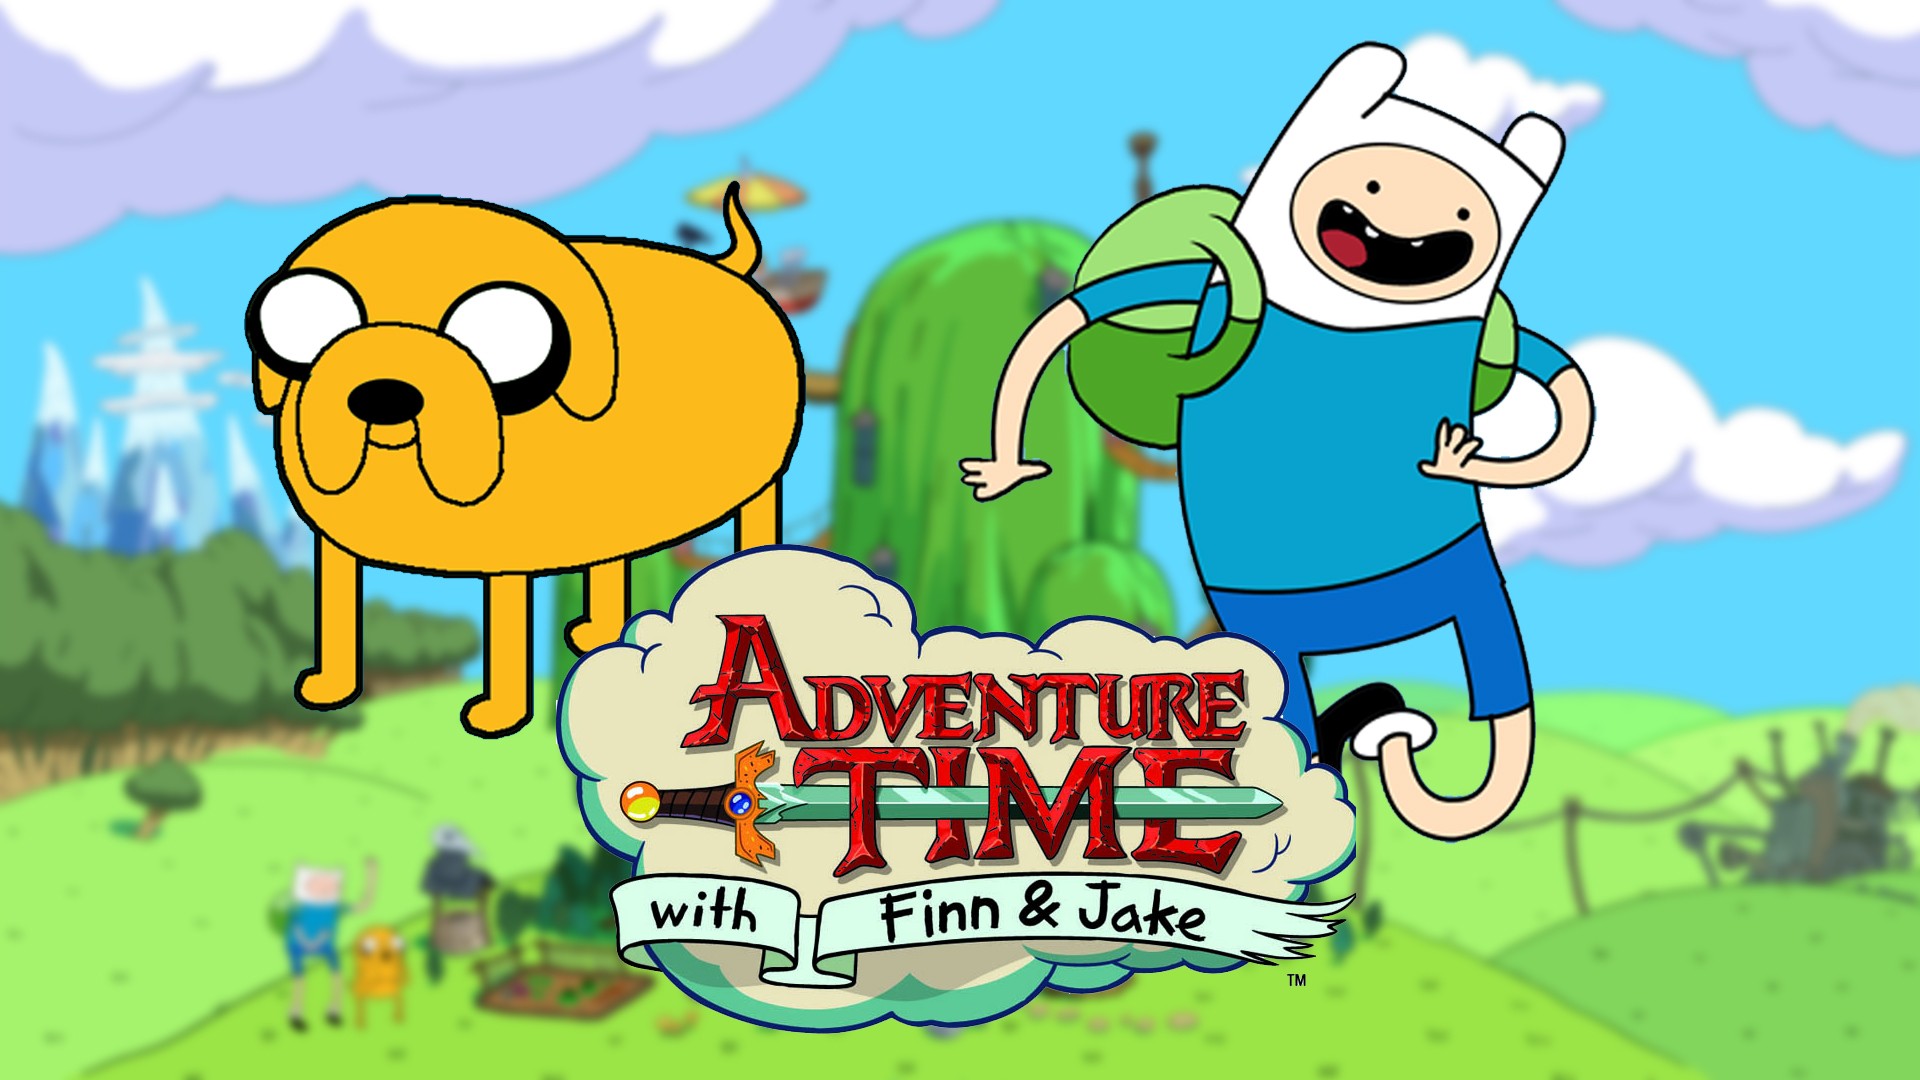 Adventure Time Wallpaper - Adventure Time Treehouse Outside , HD Wallpaper & Backgrounds